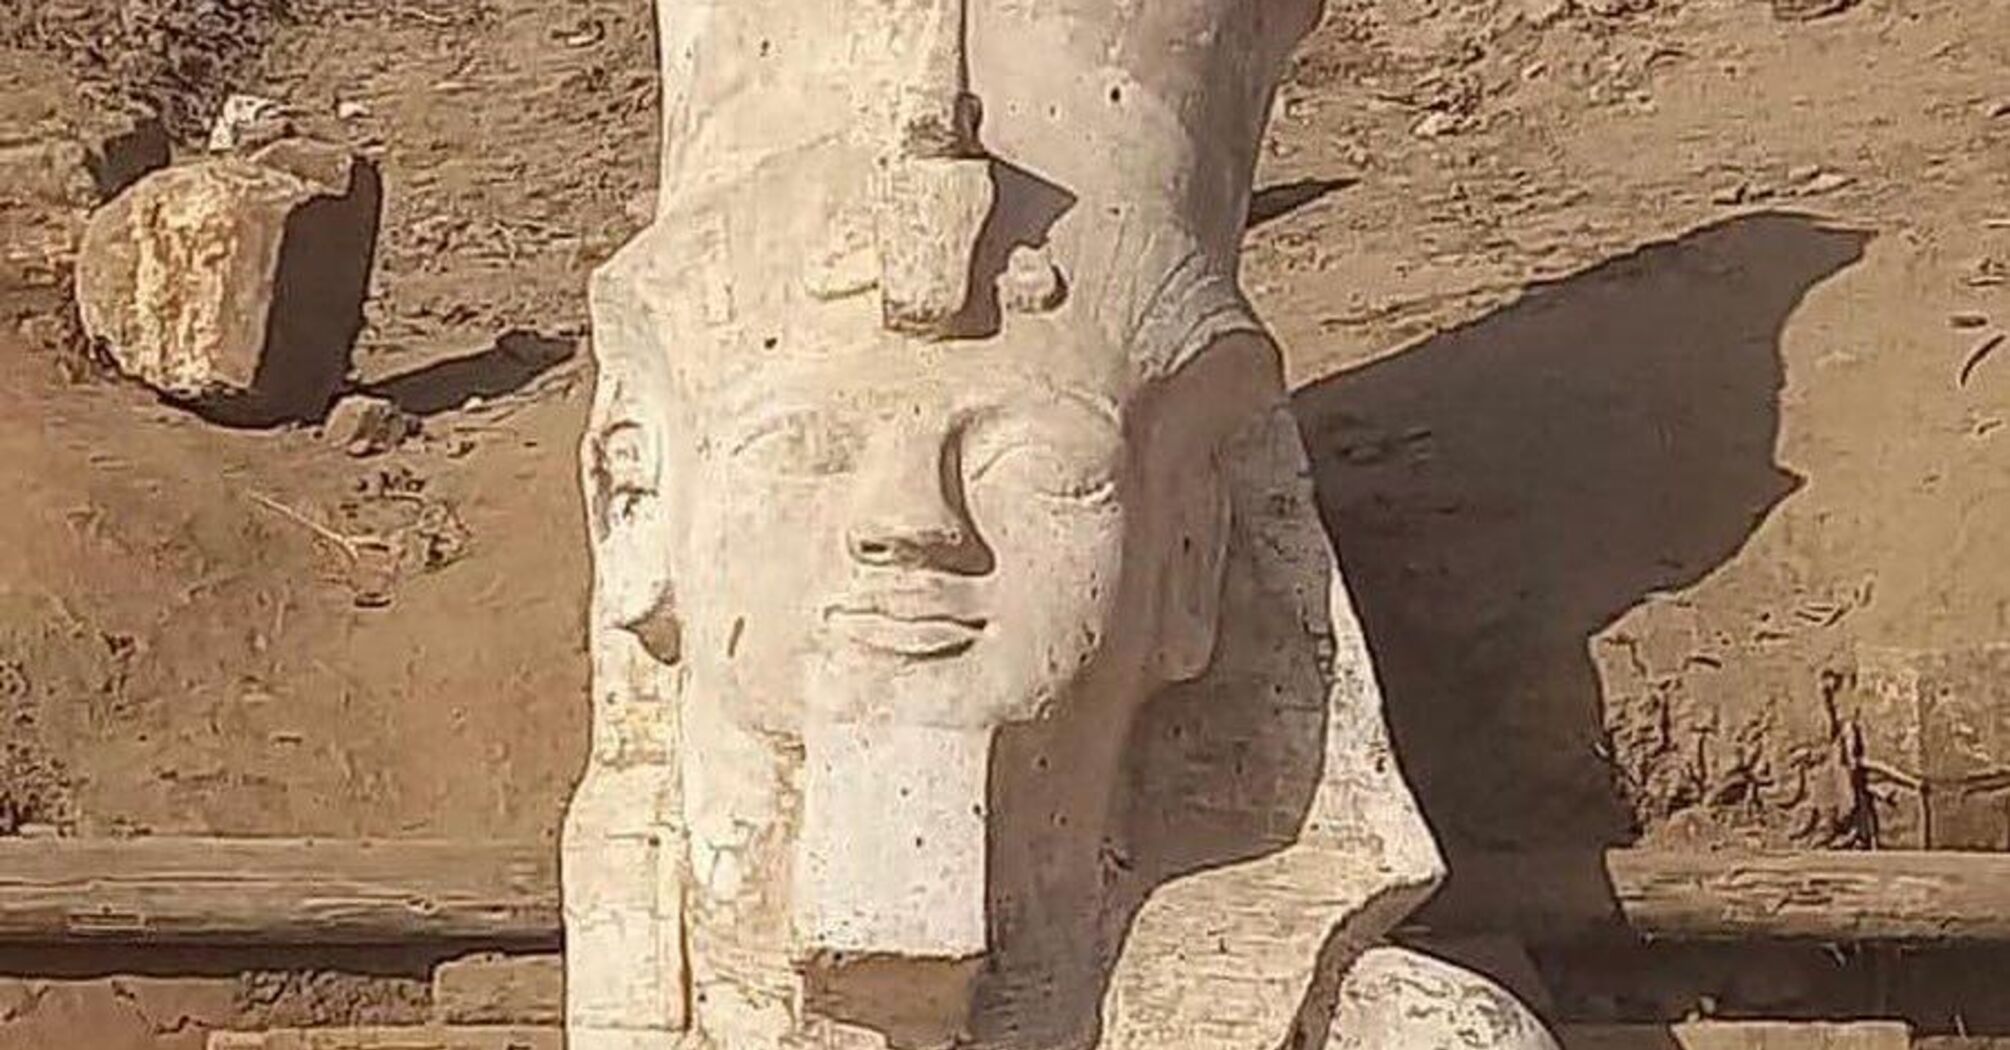 In Egypt, the upper part of the statue of Pharaoh Ramses II has been found: the lower part was discovered almost 100 years ago